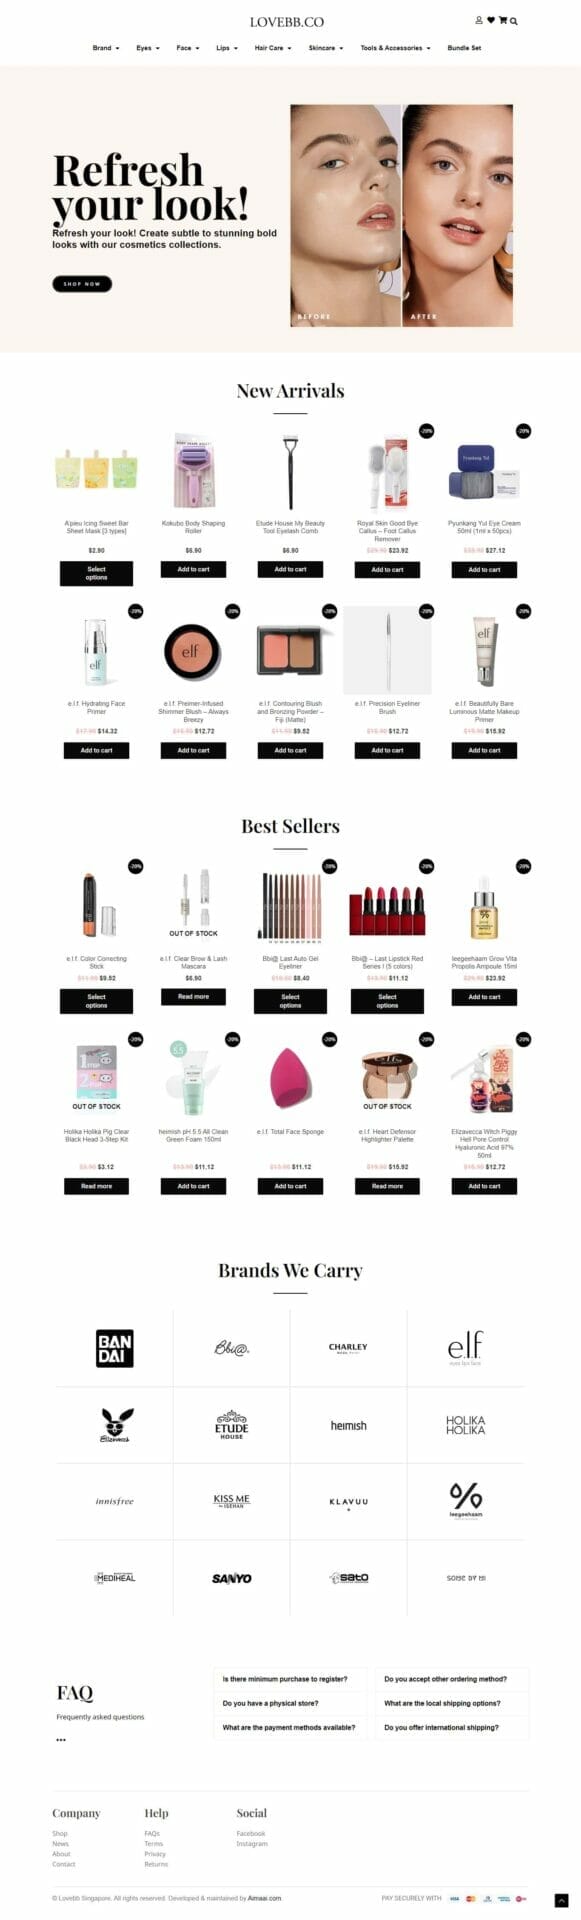 The web design of an online beauty store.